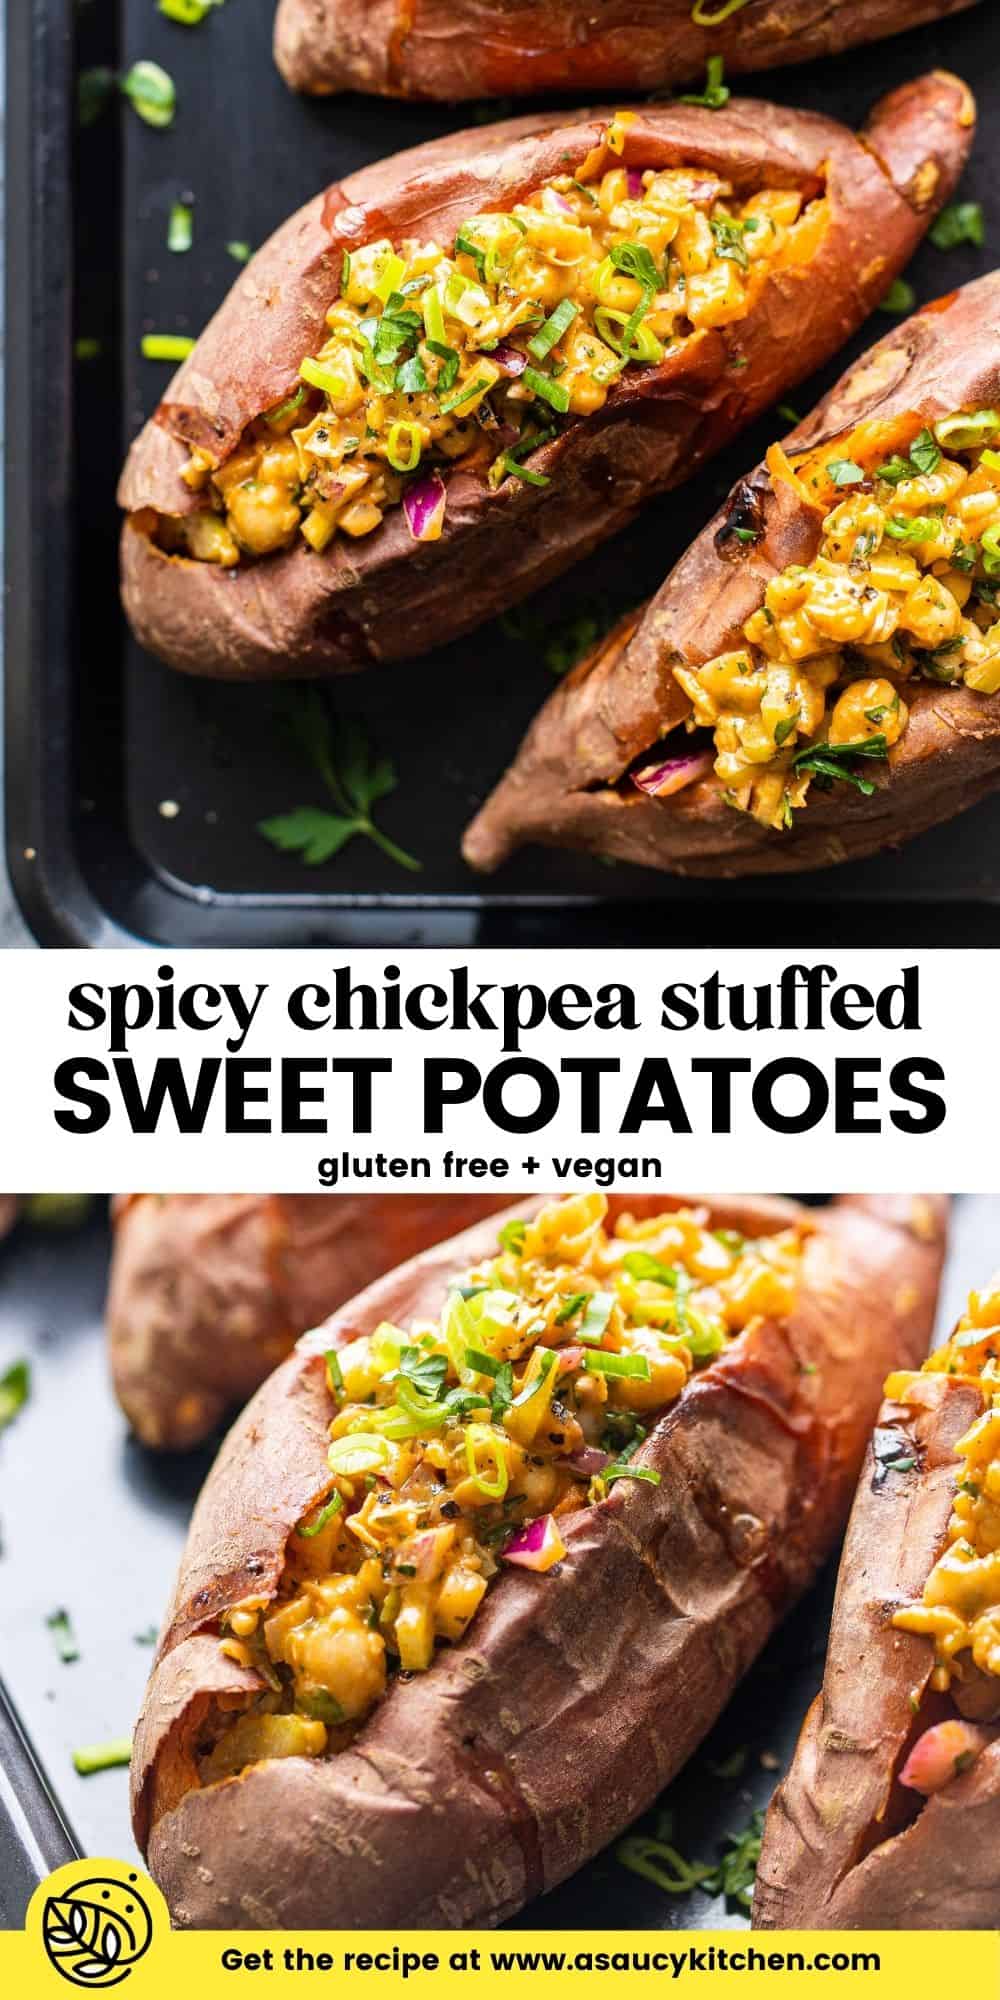 Stuffed Sweet Potatoes with Spicy Smashed Chickpeas - A Saucy Kitchen